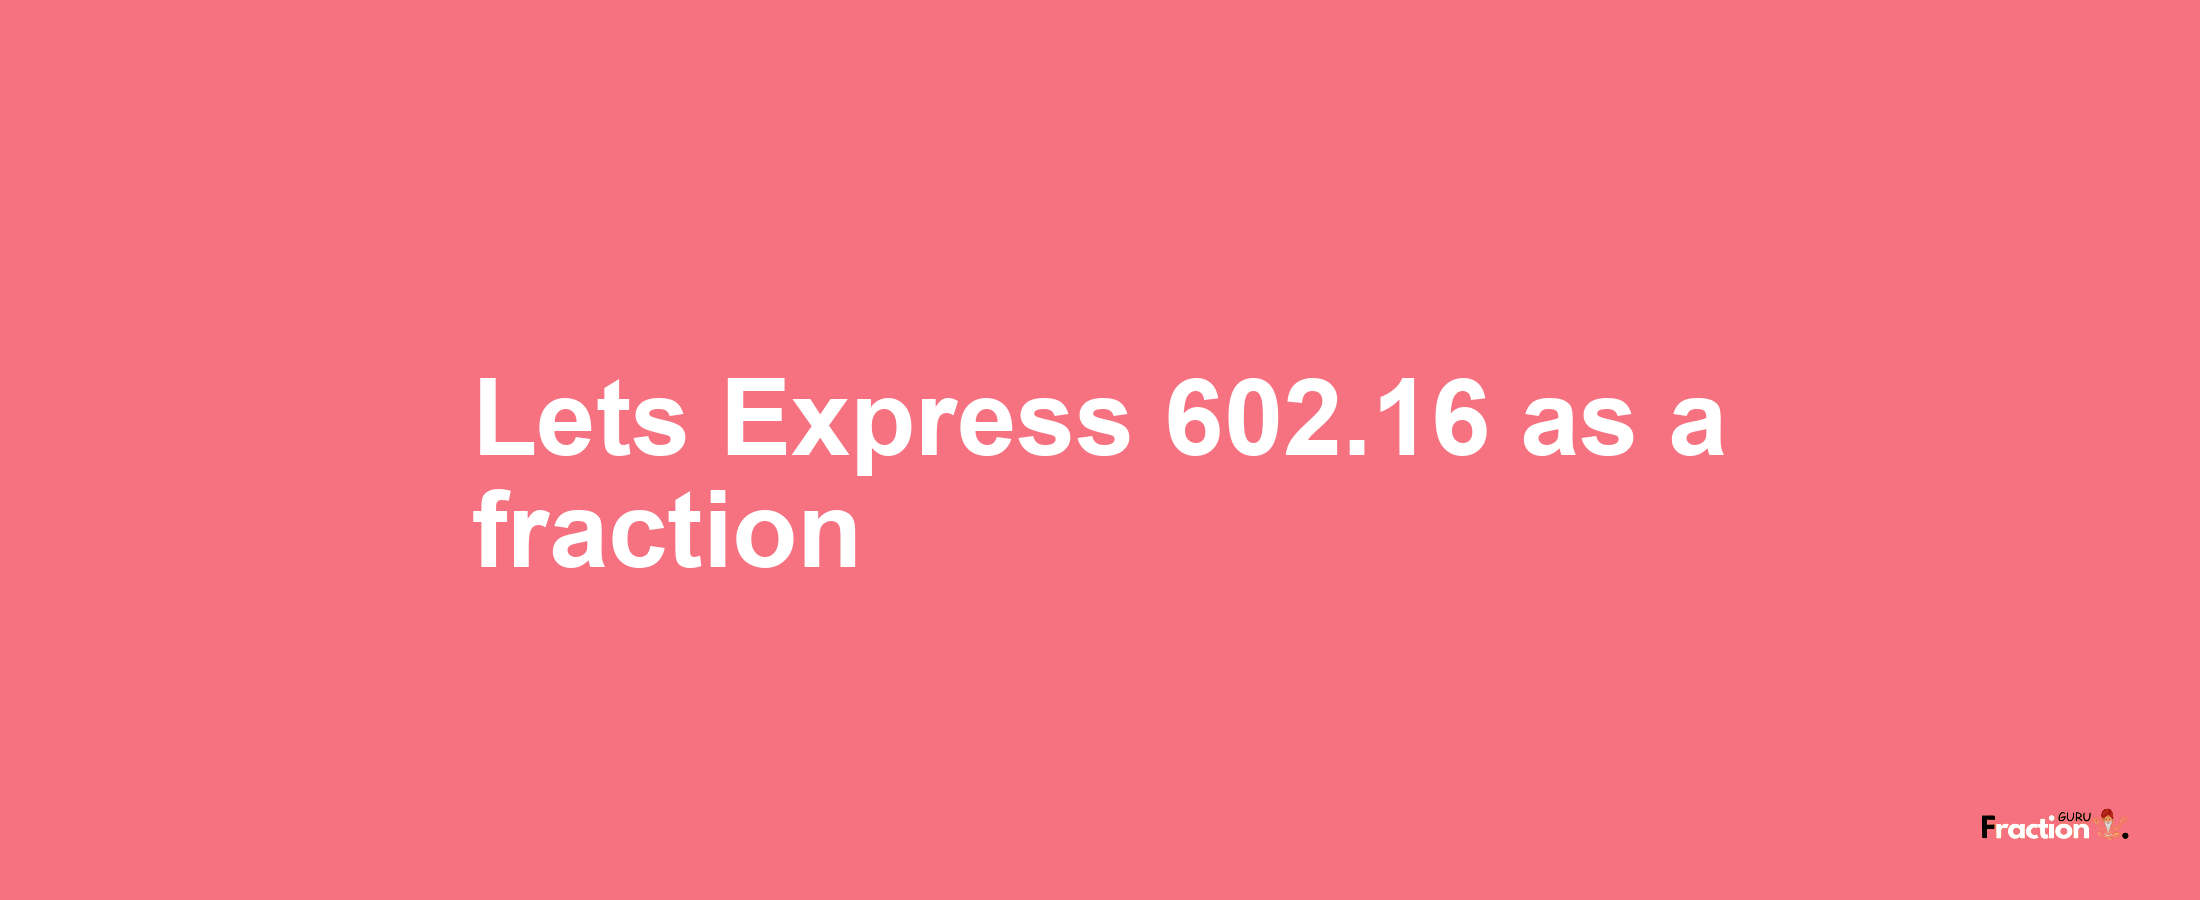 Lets Express 602.16 as afraction